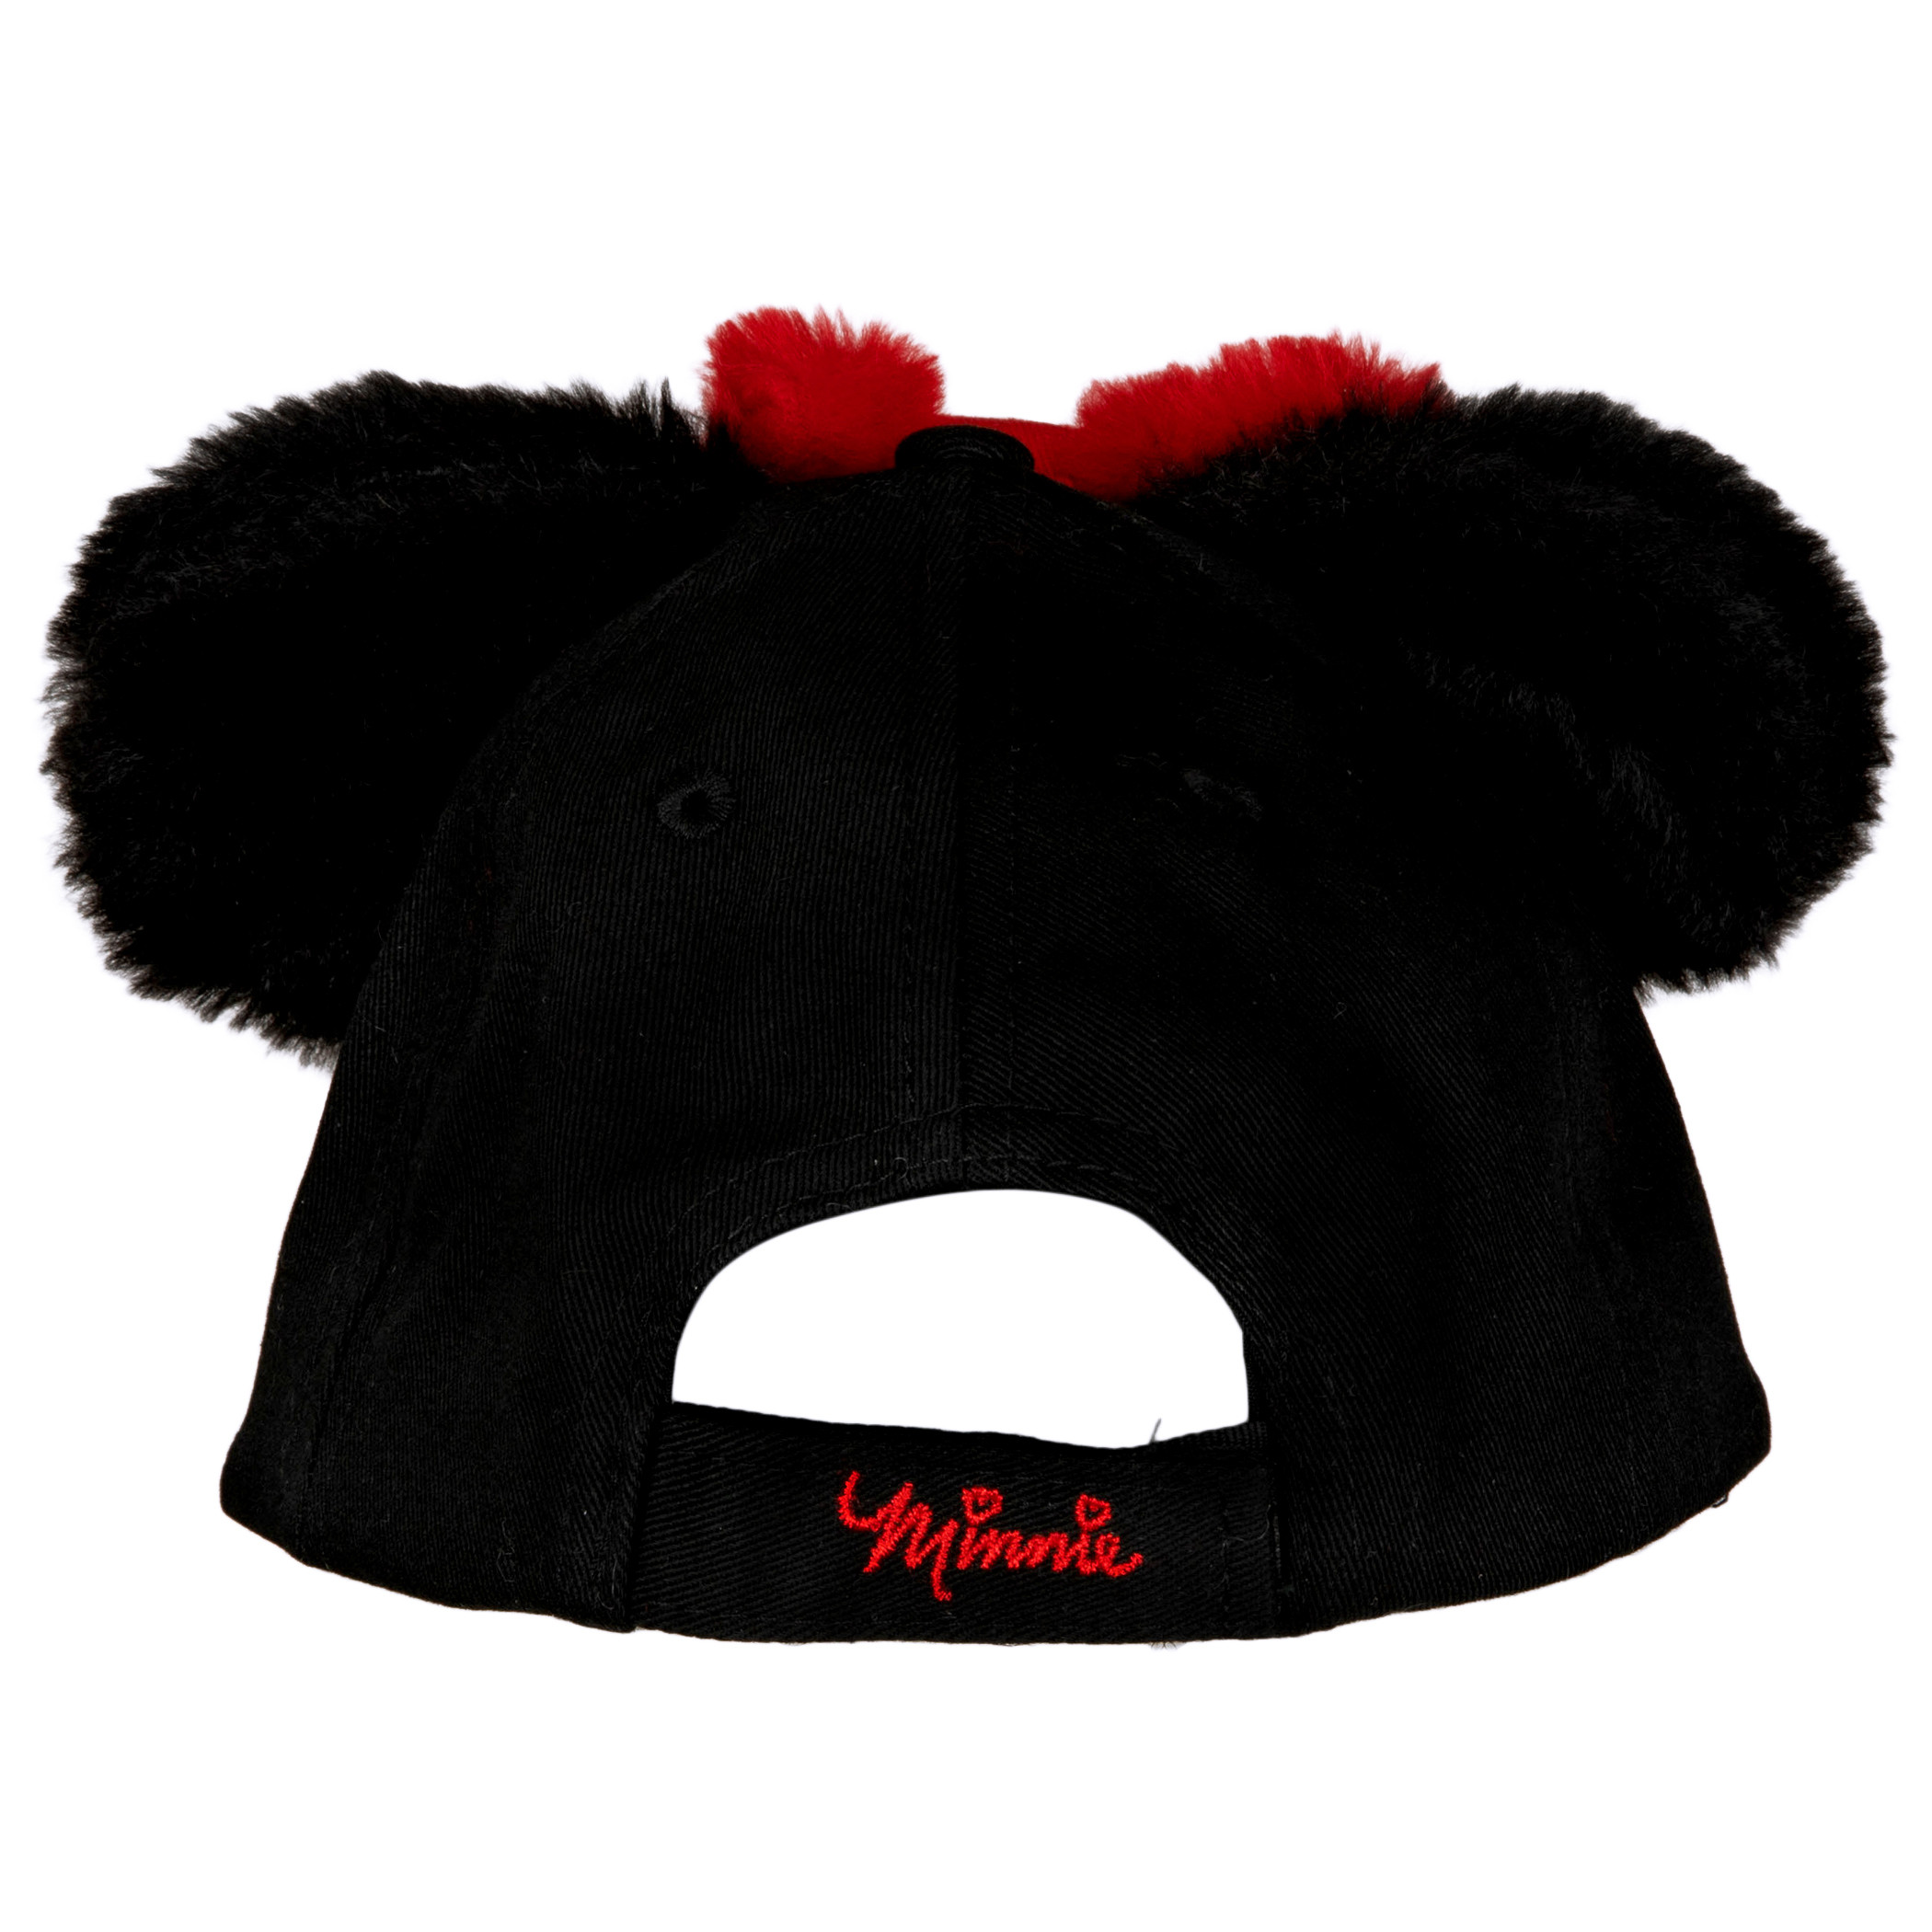 Disney Minnie Mouse Adjustable Baseball Cap with Plush Ears and Bow